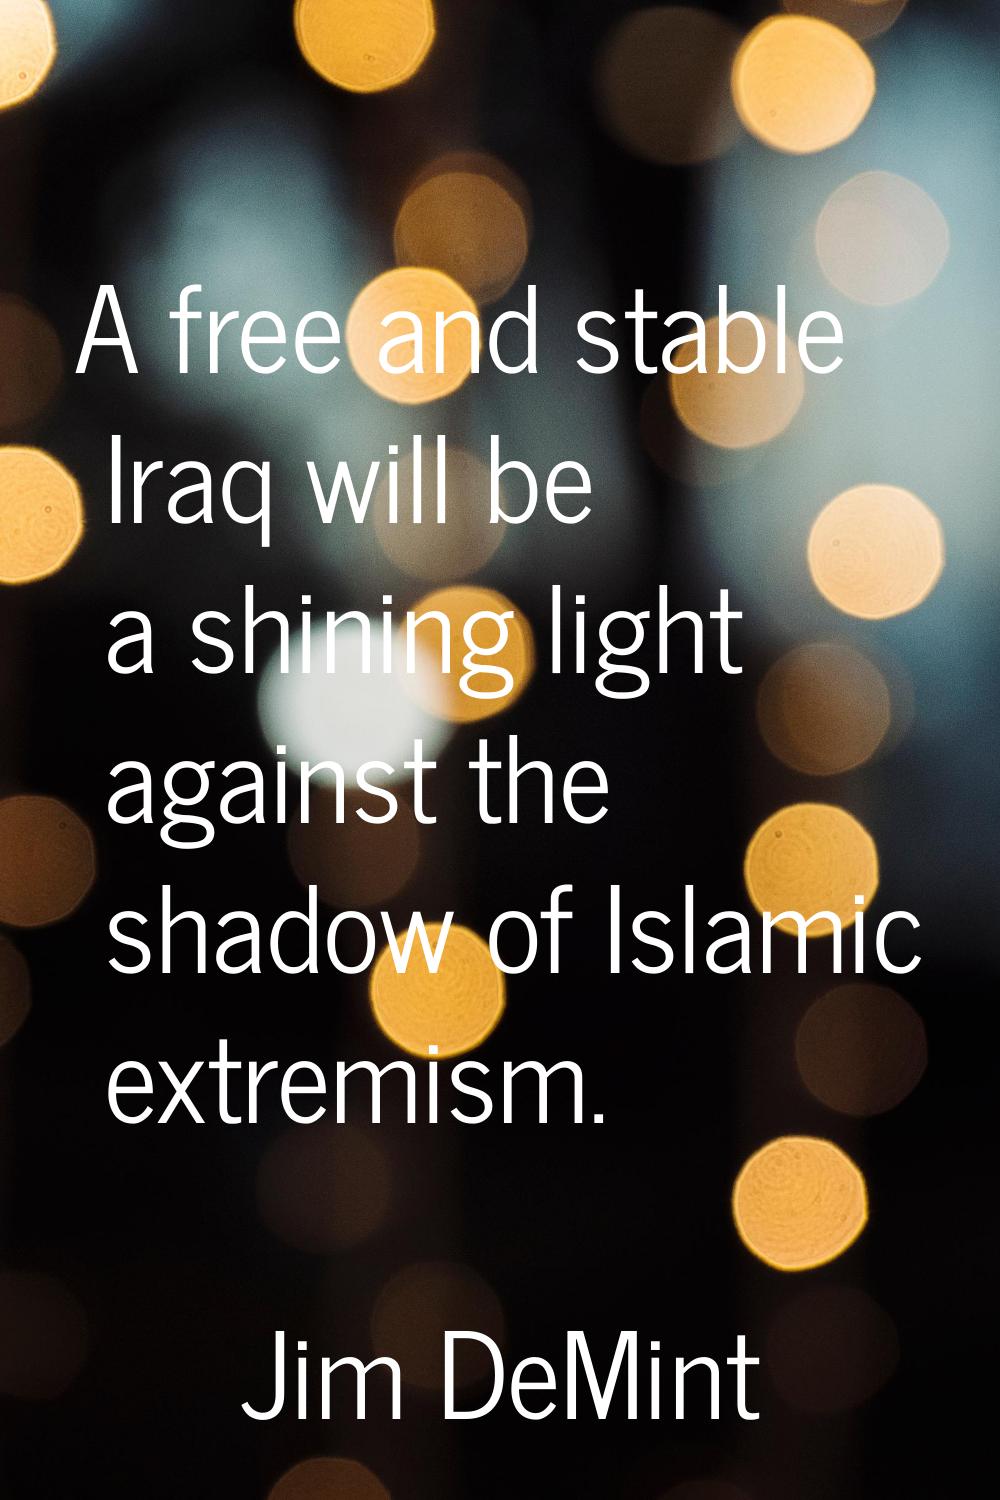 A free and stable Iraq will be a shining light against the shadow of Islamic extremism.